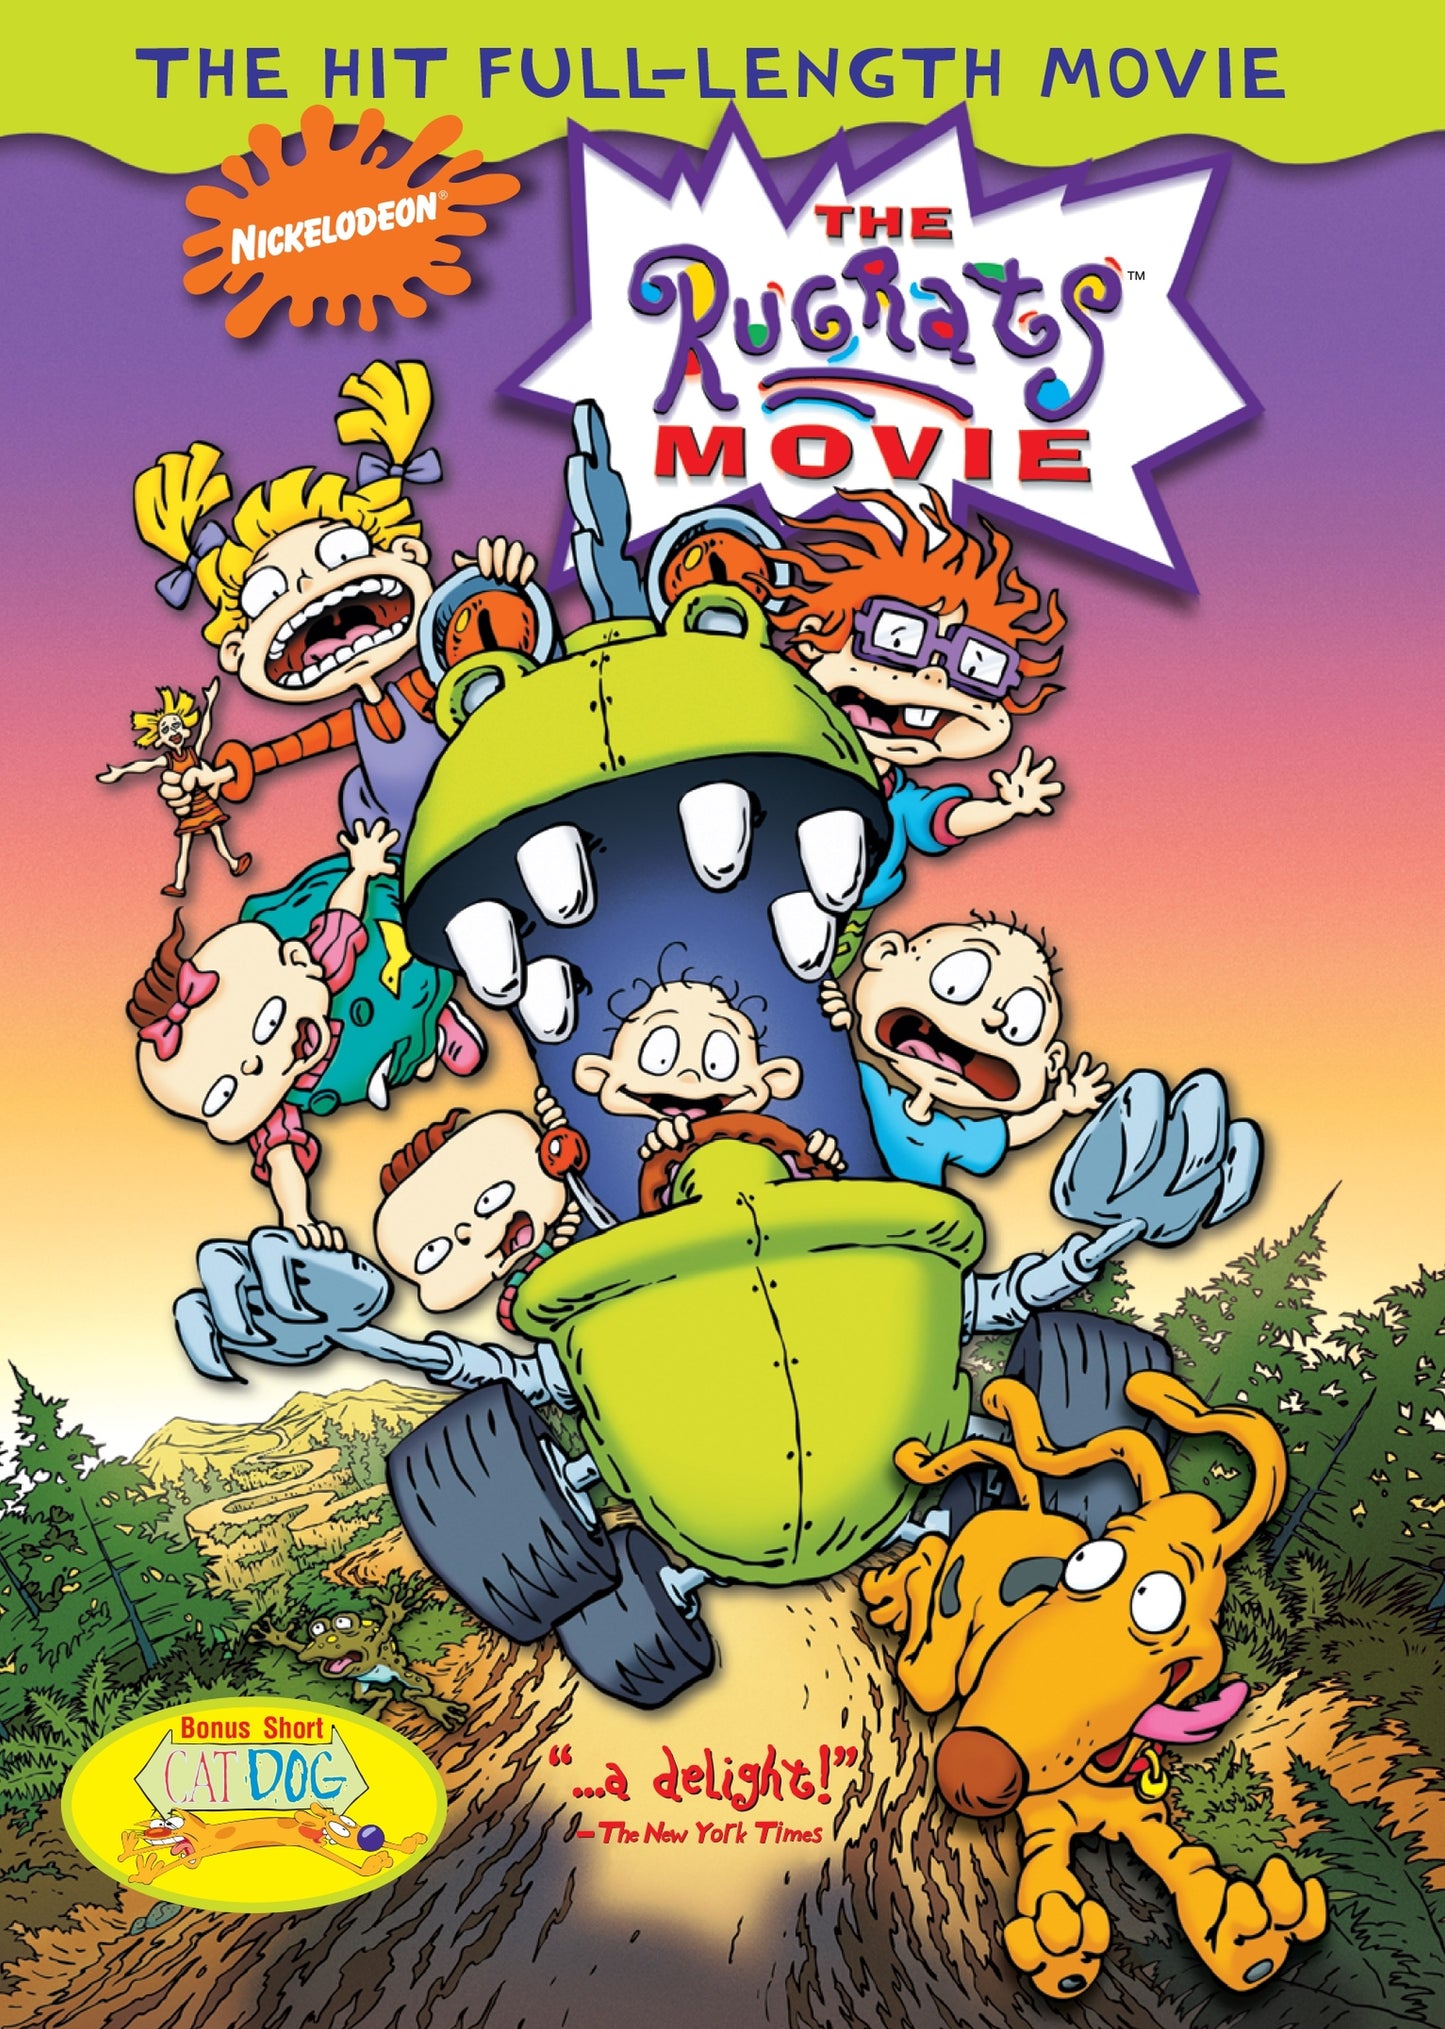 Rugrats Movie cover art